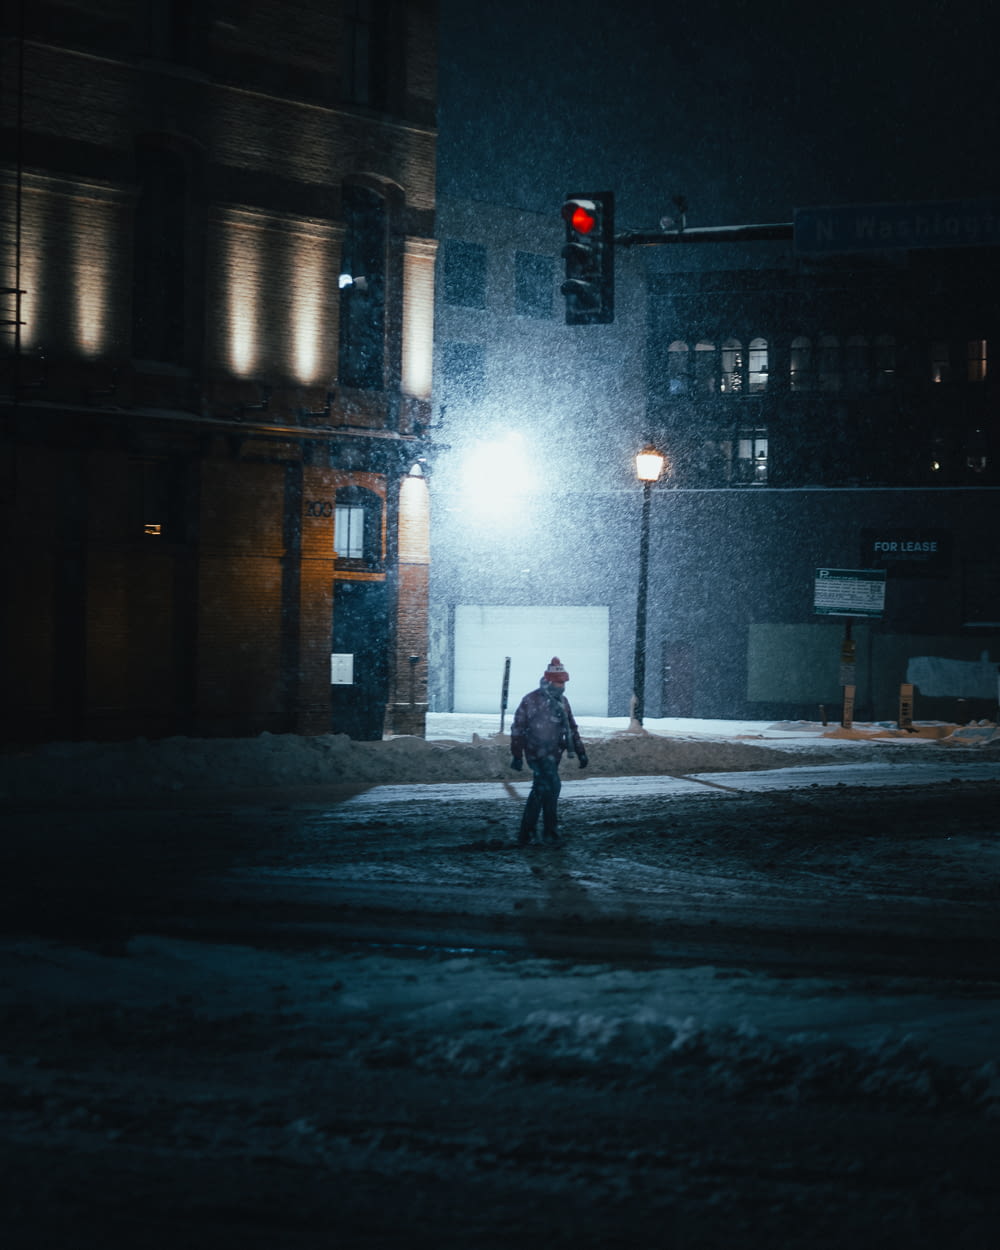 person walking on street during night time